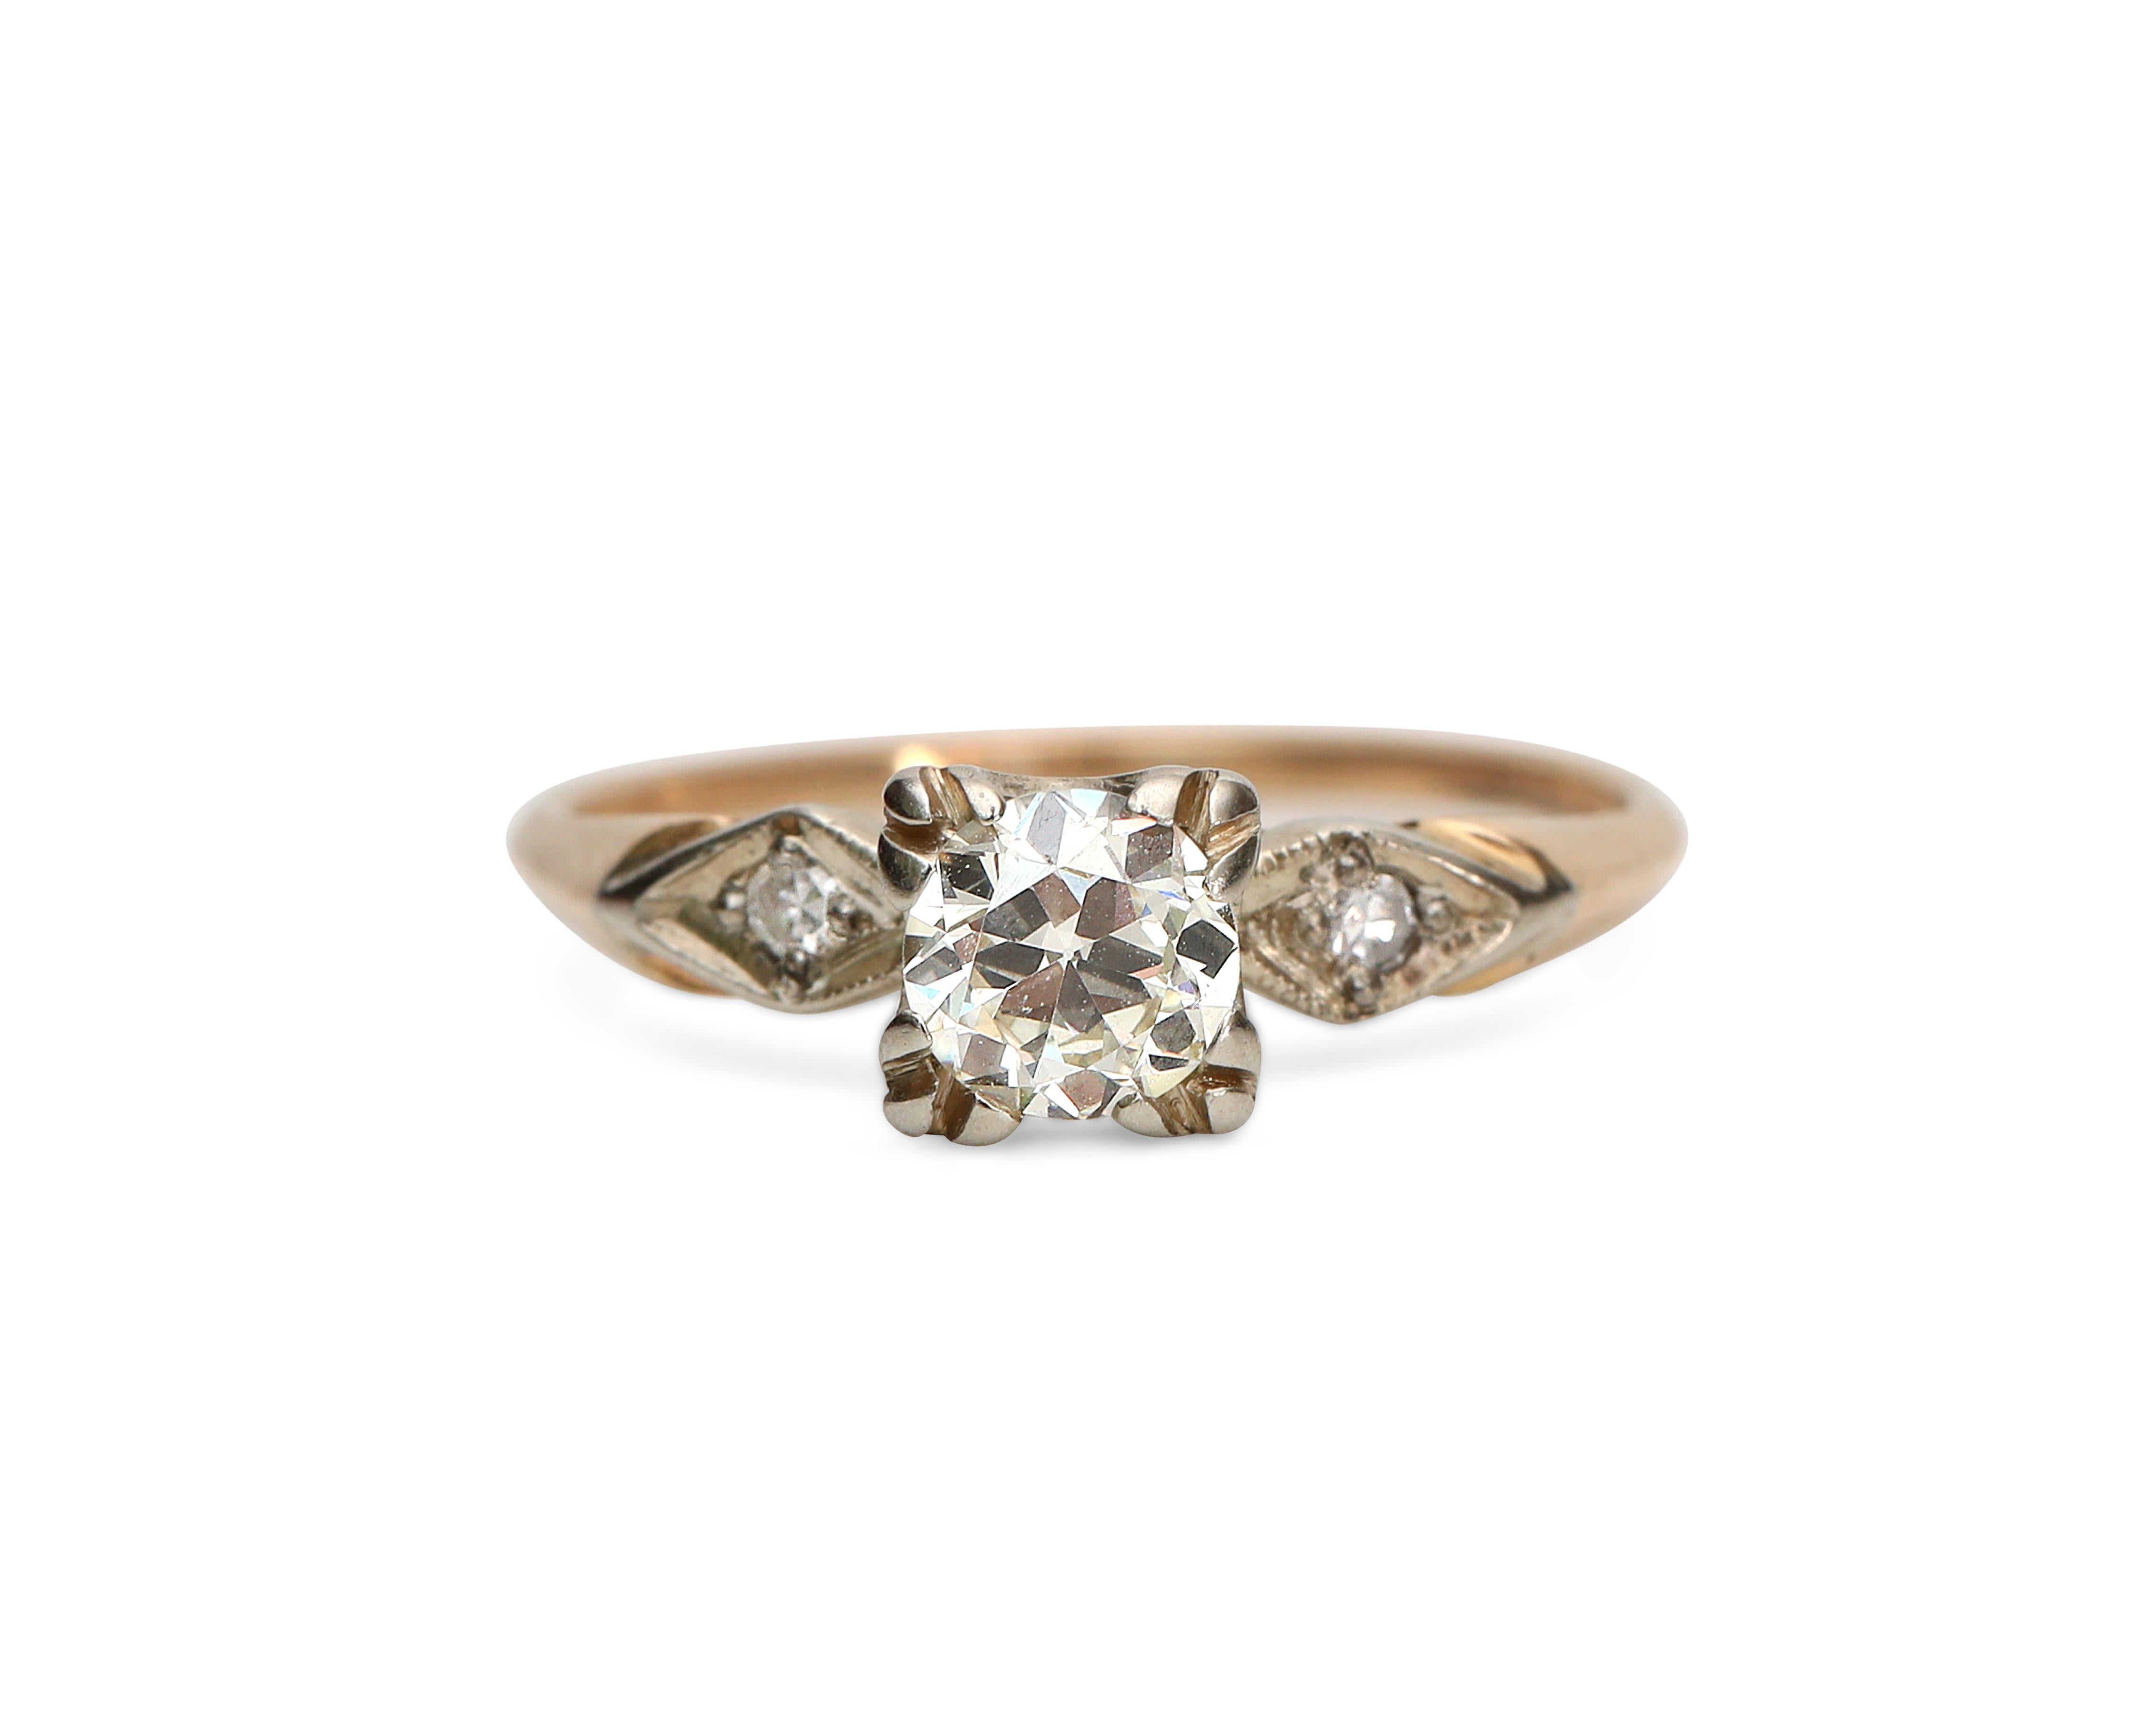 This classic diamond engagement ring features a lively 0.60 carat solitaire diamond set in the center with squared head. Two smaller diamonds add sparkle from shoulder to shoulder of the 14K yellow gold ring.

This is a true vintage piece, and we